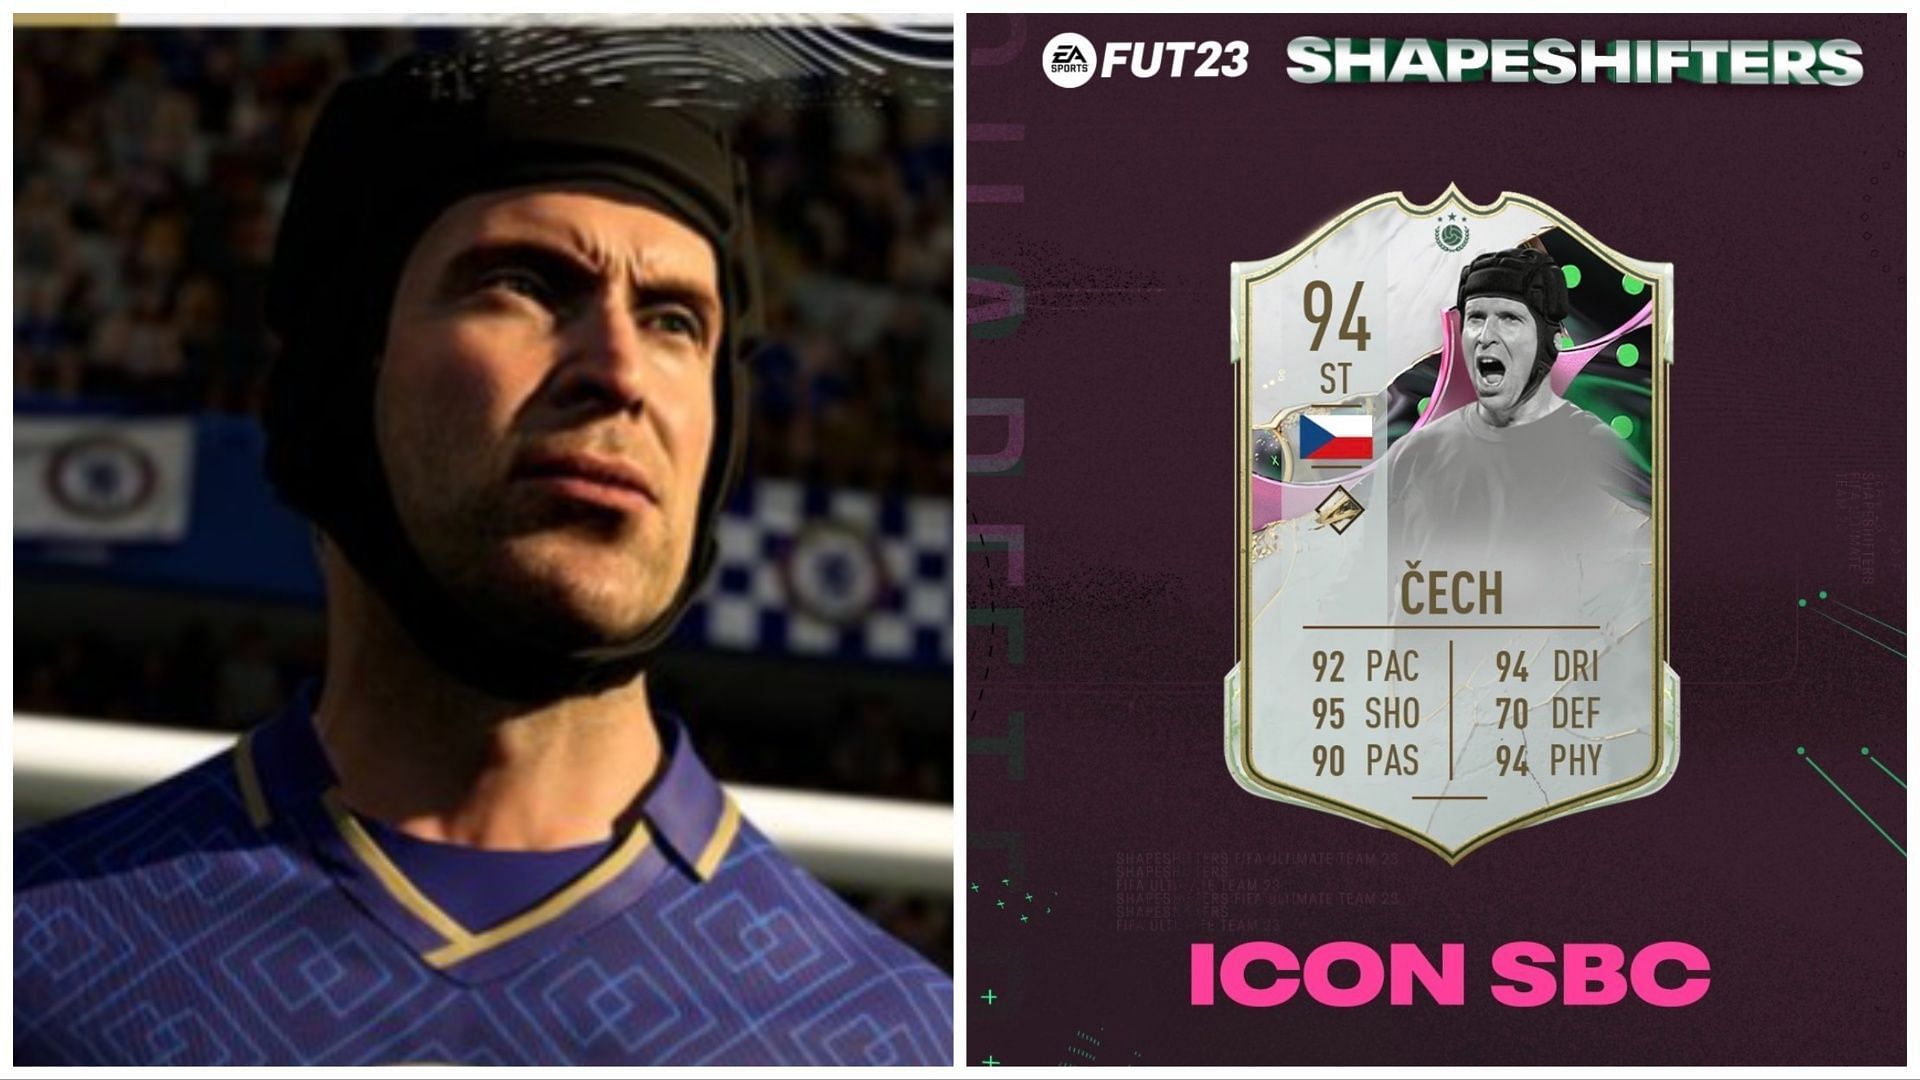 Shapeshifters Cech is now live in FIFA 23 (Images via EA Sports)